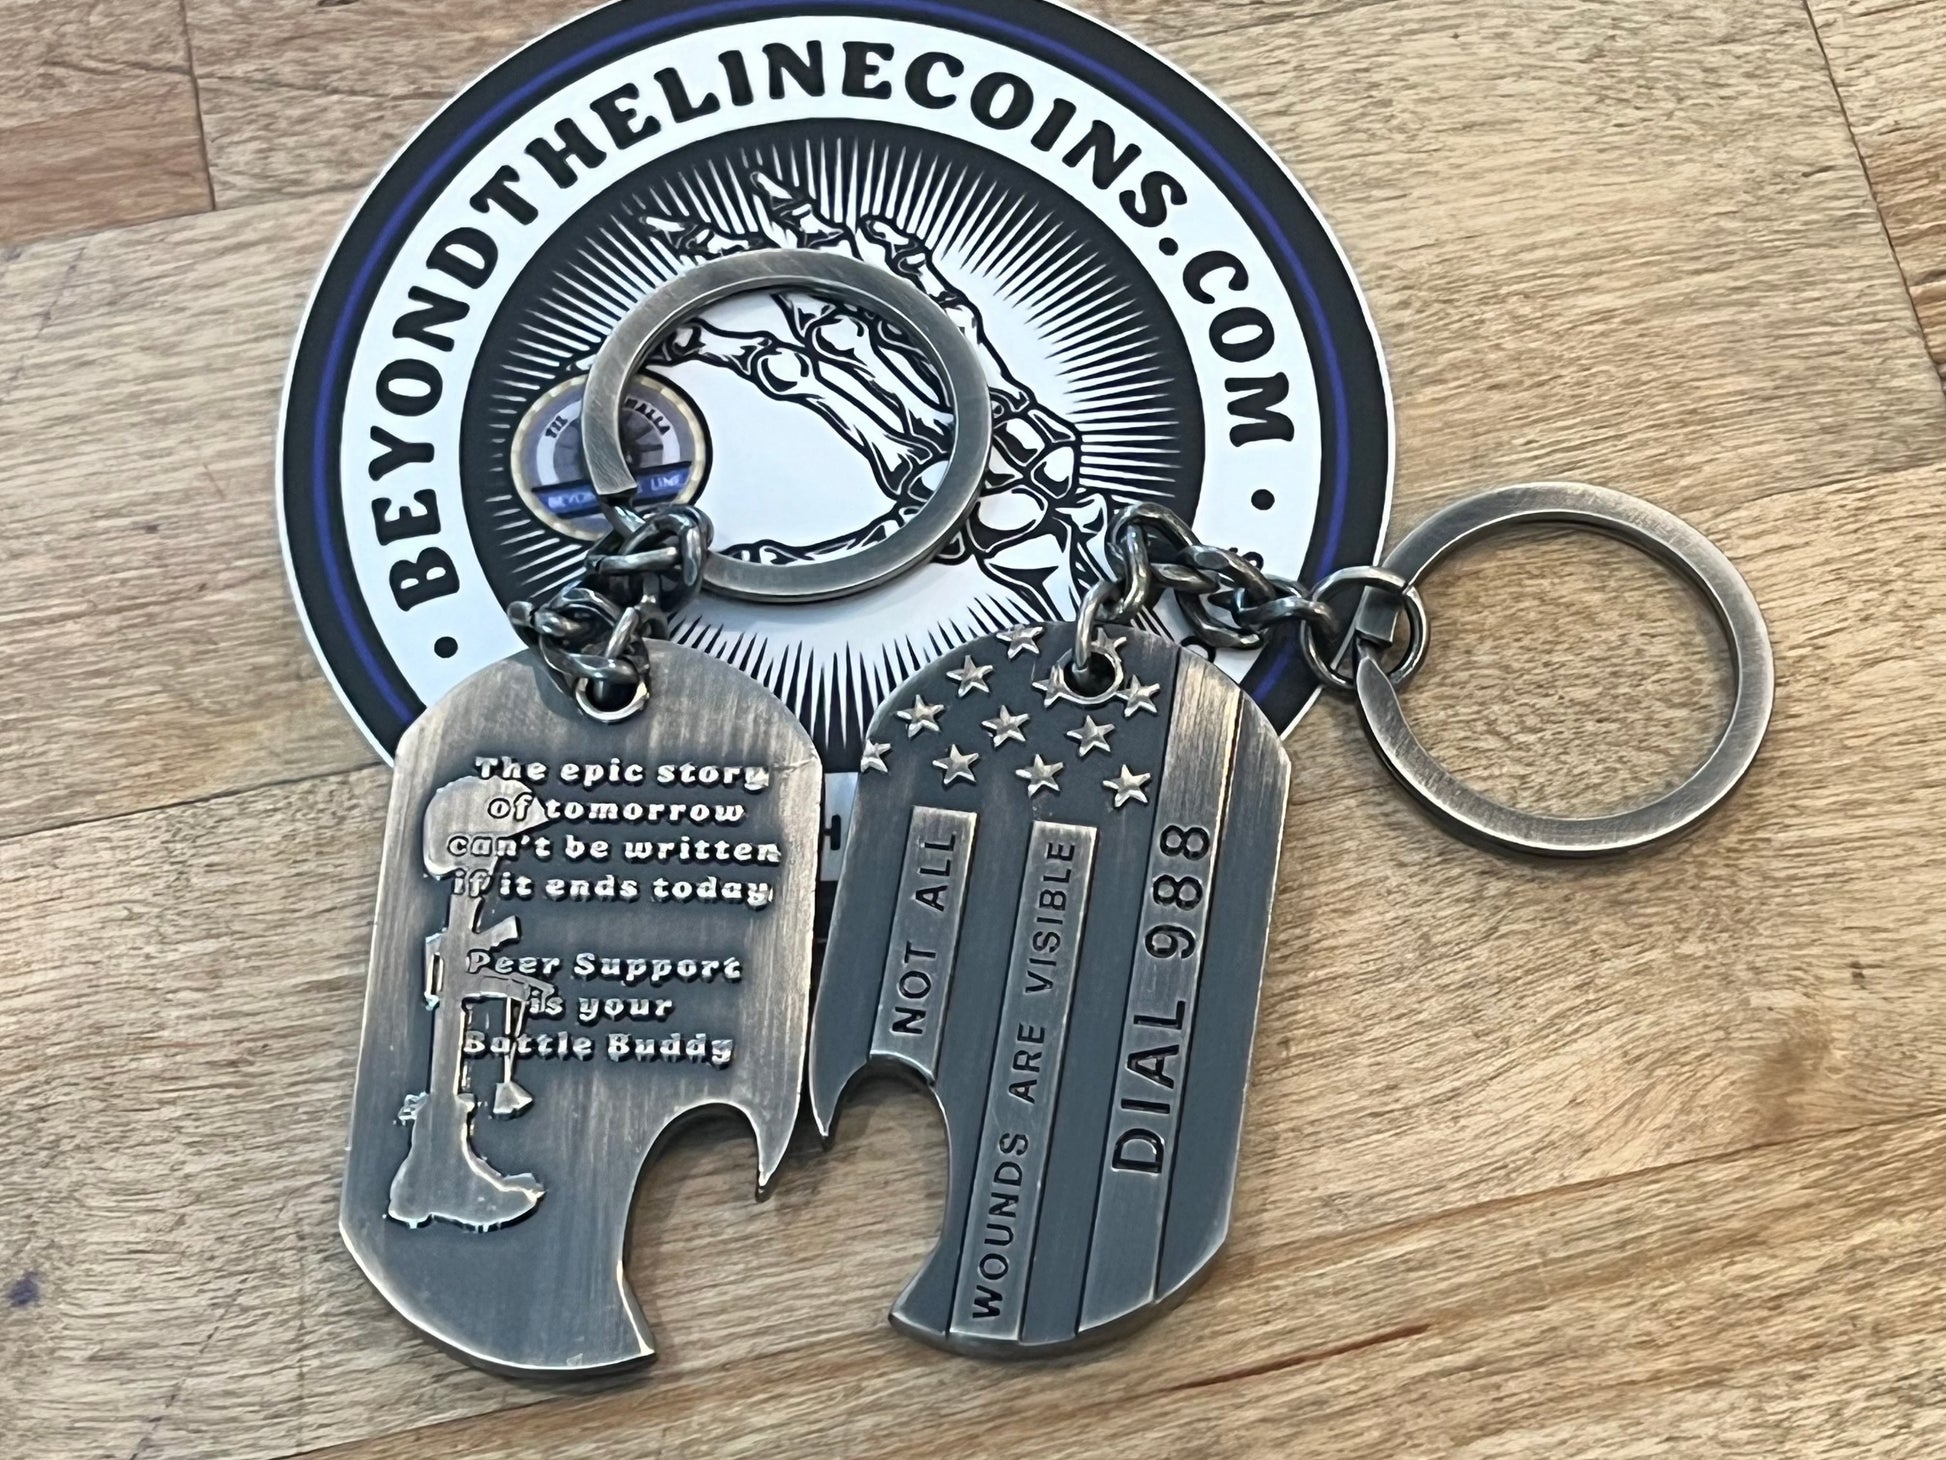 Suicide Awareness Keychain - Custom Challenge Coins from Beyond The Line 